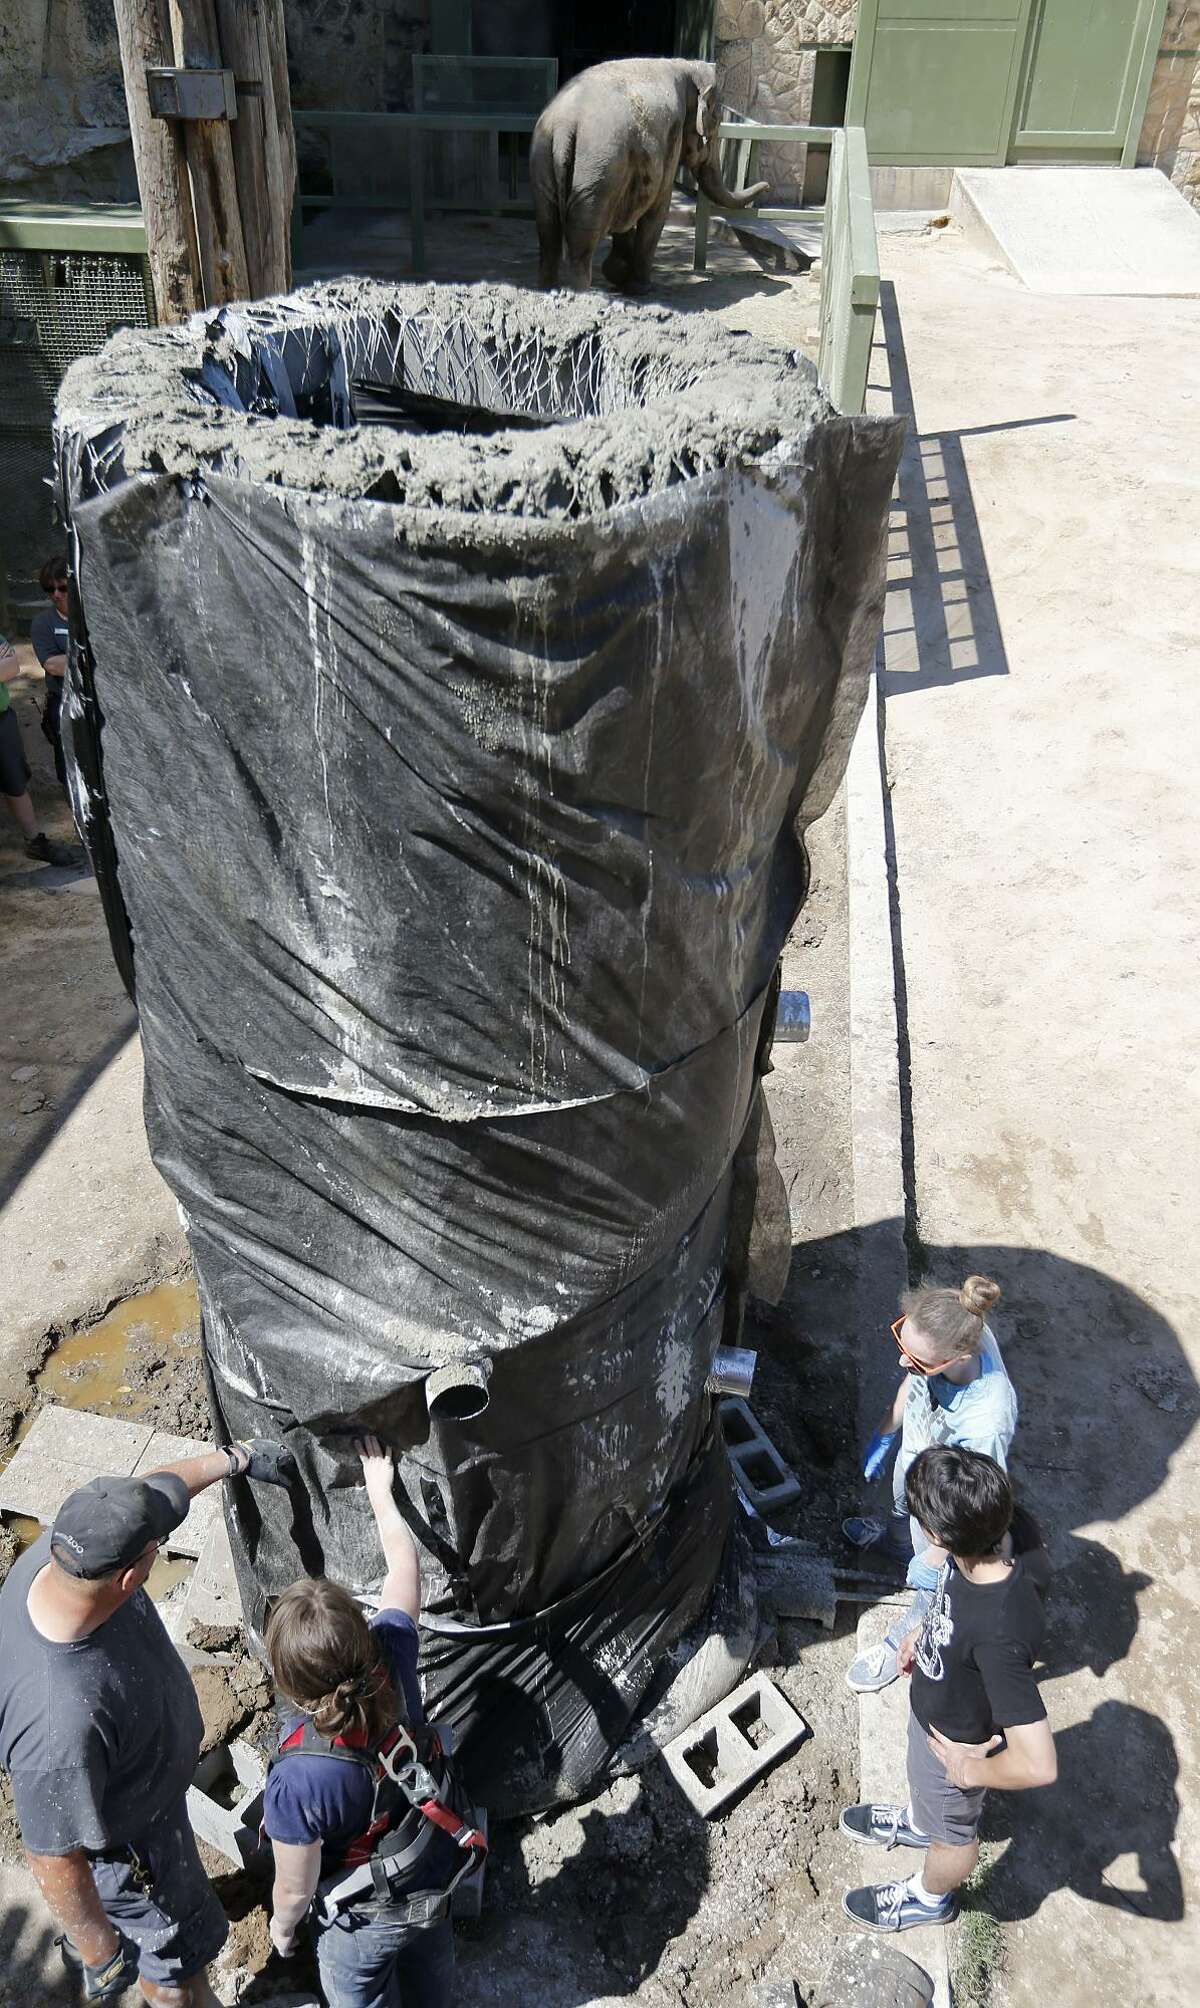 San Antonio Zoo Director of Mammals Jonathan Reding (from left), UTSA assistant research professor Gold Darr Hood and UTSA students David Mata and Julie Griffee build a shower for the elephants in their exhibit Friday March 30, 2018 at the San Antonio Zoo.